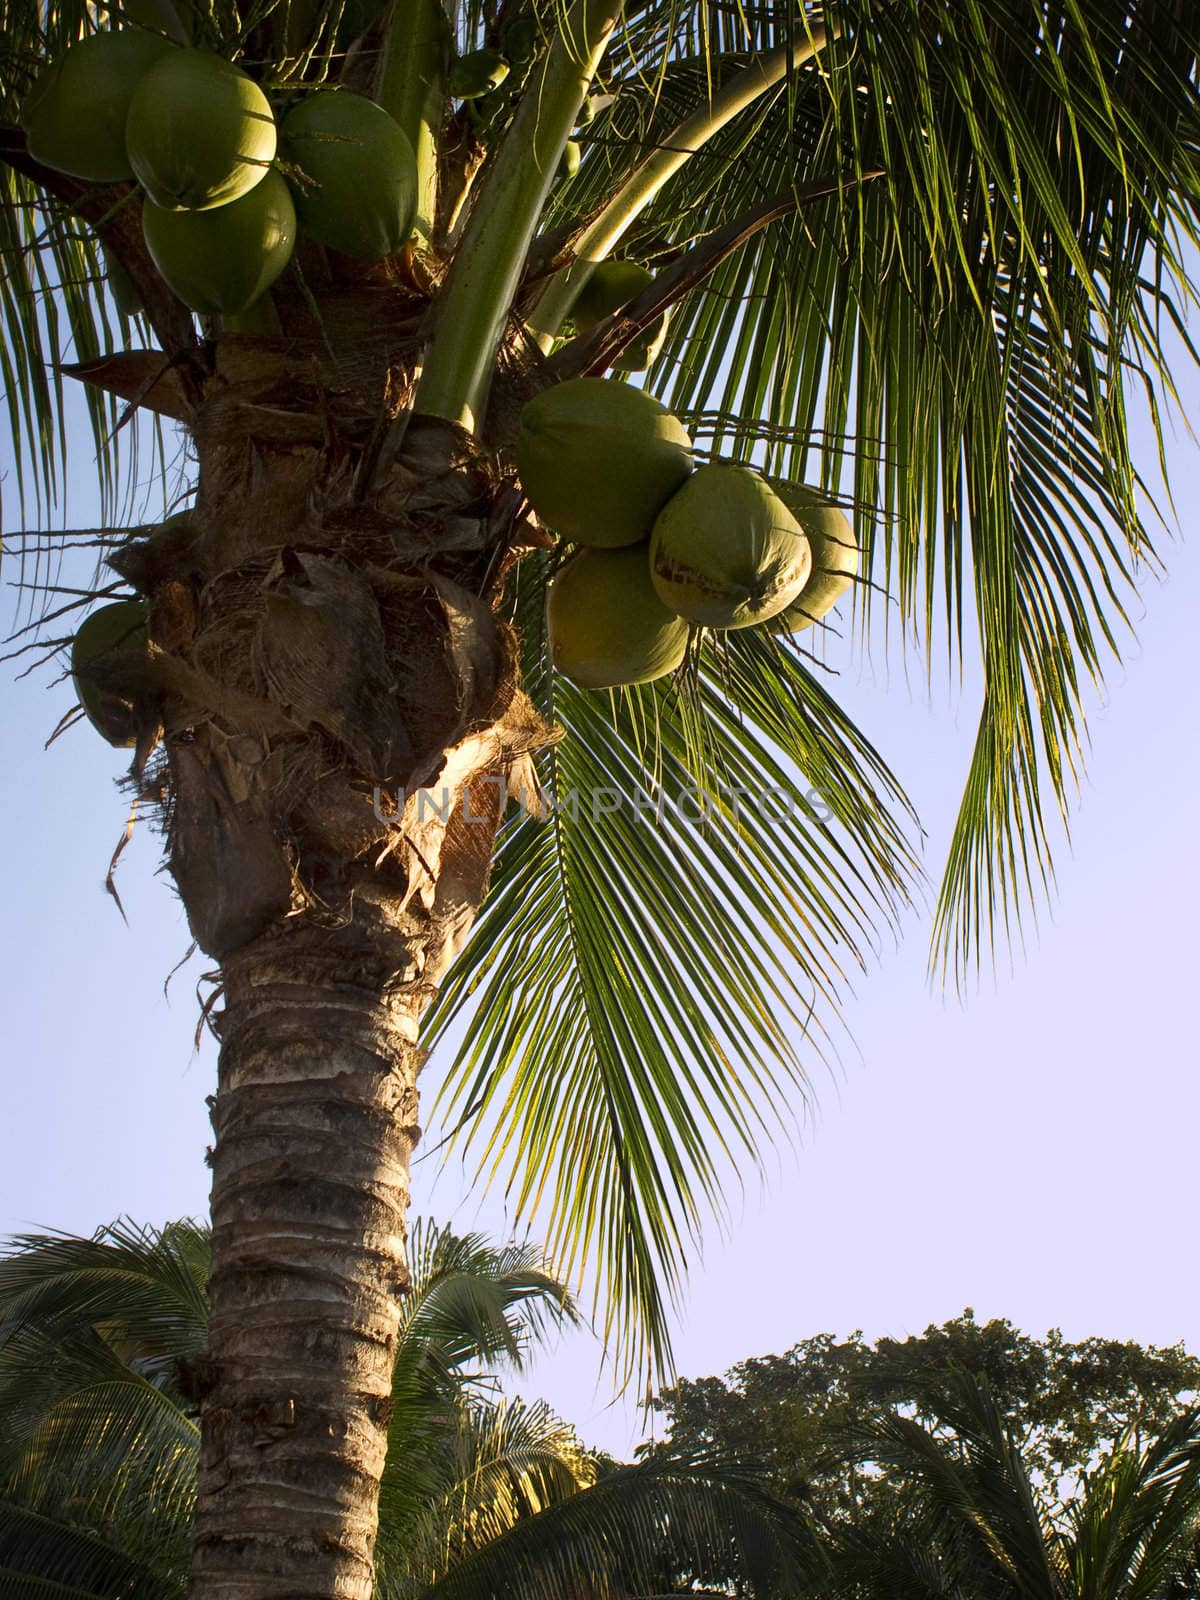 Close up of a coconut tree with coconut still hanging on the branch